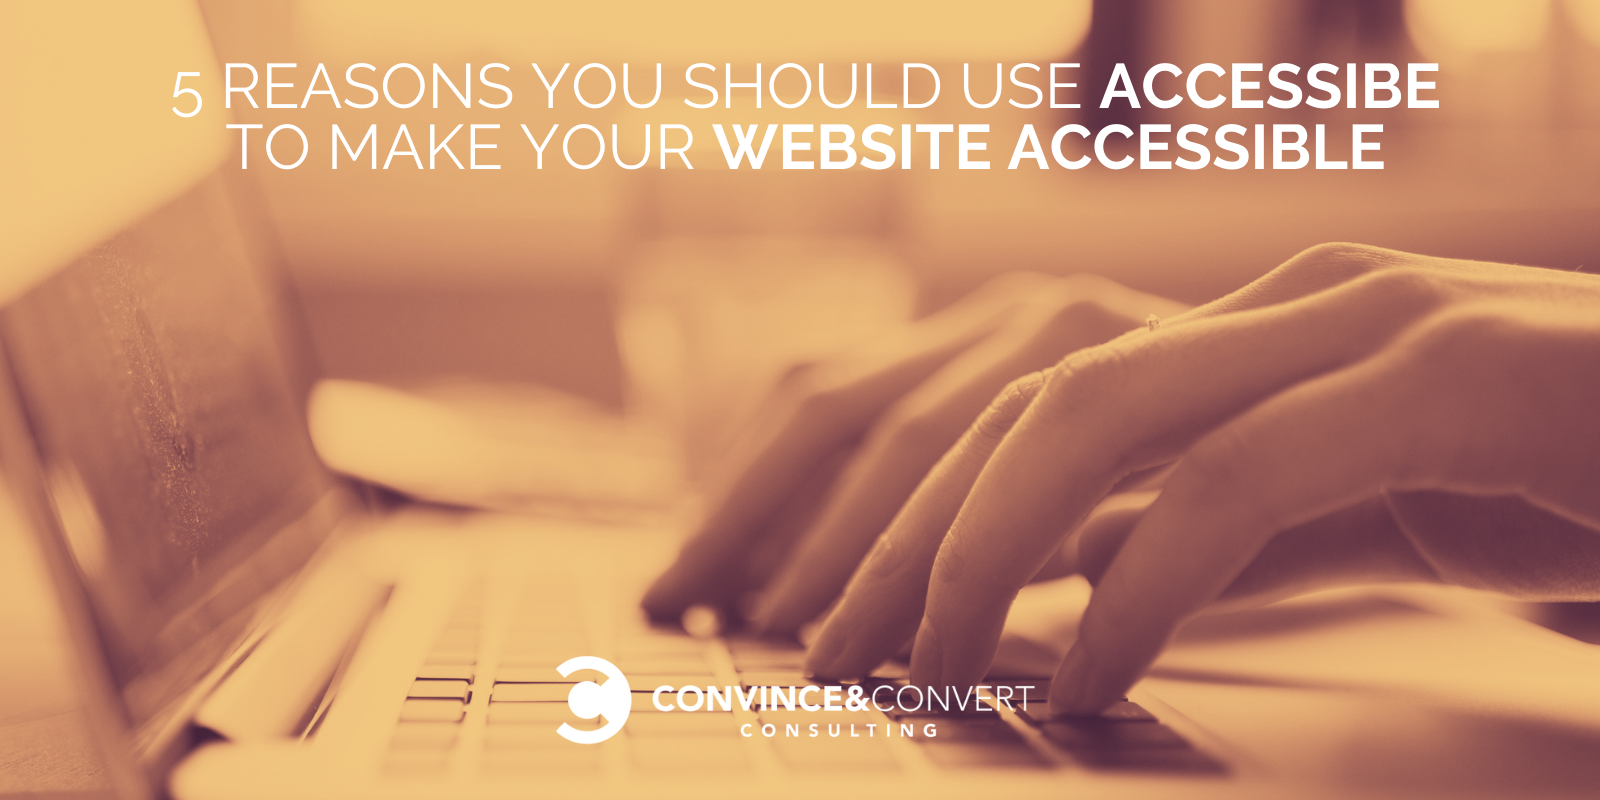 5 Reasons to Use accessiBe to Make Your Website Accessible